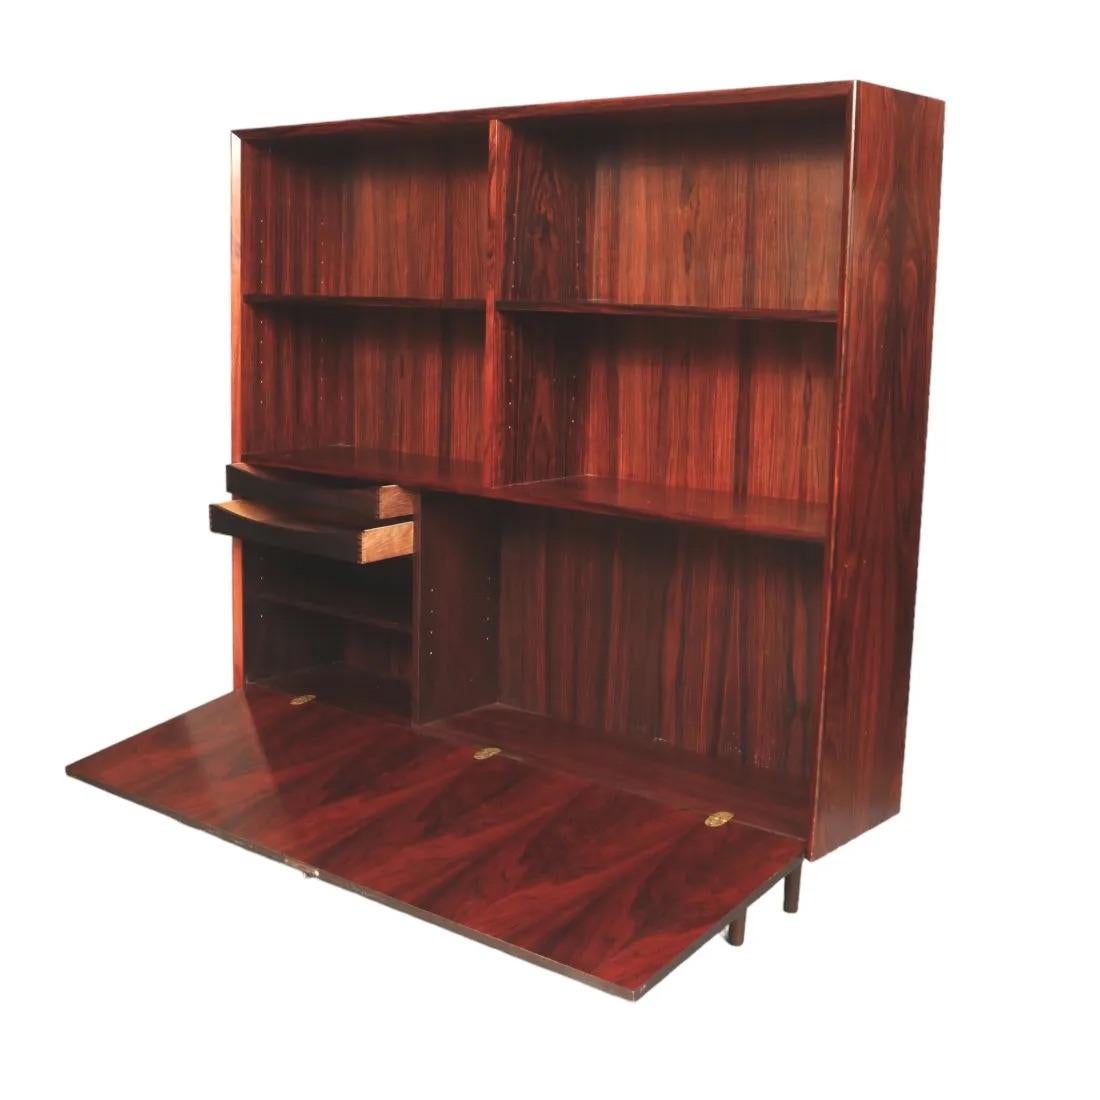 Mid-Century Rosewood Bookshelf With Shelves and Drawer from 1950s
 in very good condition for age and use 